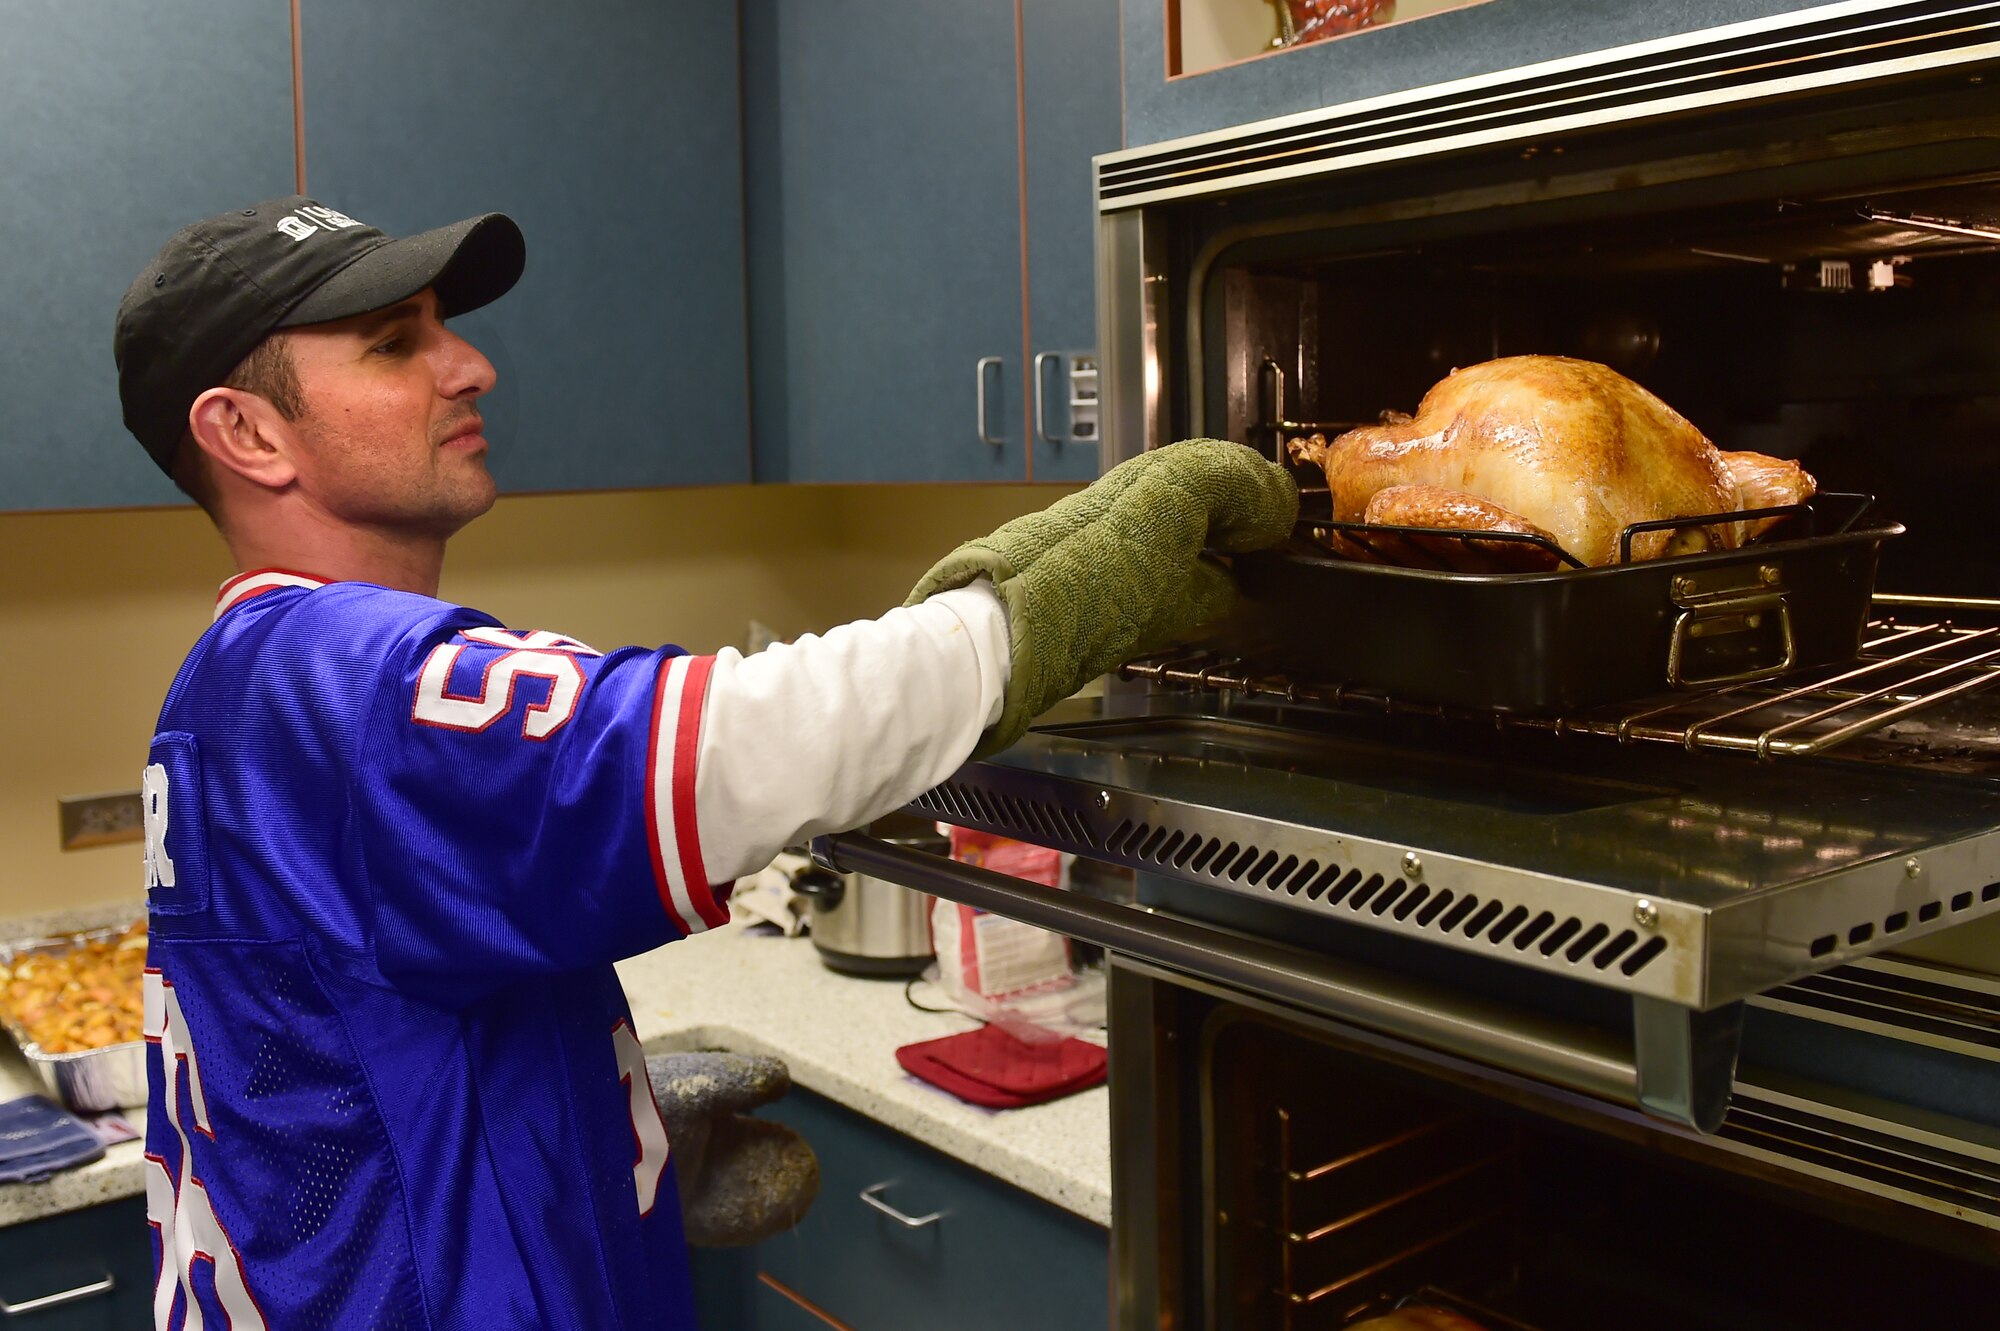 Chief Master Sgt. Brian Kruzelnick, 460th Space Wing command chief, prepares a turkey to be served to members of Buckley AFB Nov. 26, 2015, on Buckley Air Force Base, Colo. Buckley AFB leadership, along with the Buckley Spouses Group and the Buckley First Sergeants Council, organized and served members of Buckley AFB who didn’t have a place to go on Thanksgiving. (U.S. Air Force photo by Airman 1st Class Luke W. Nowakowski/Released)